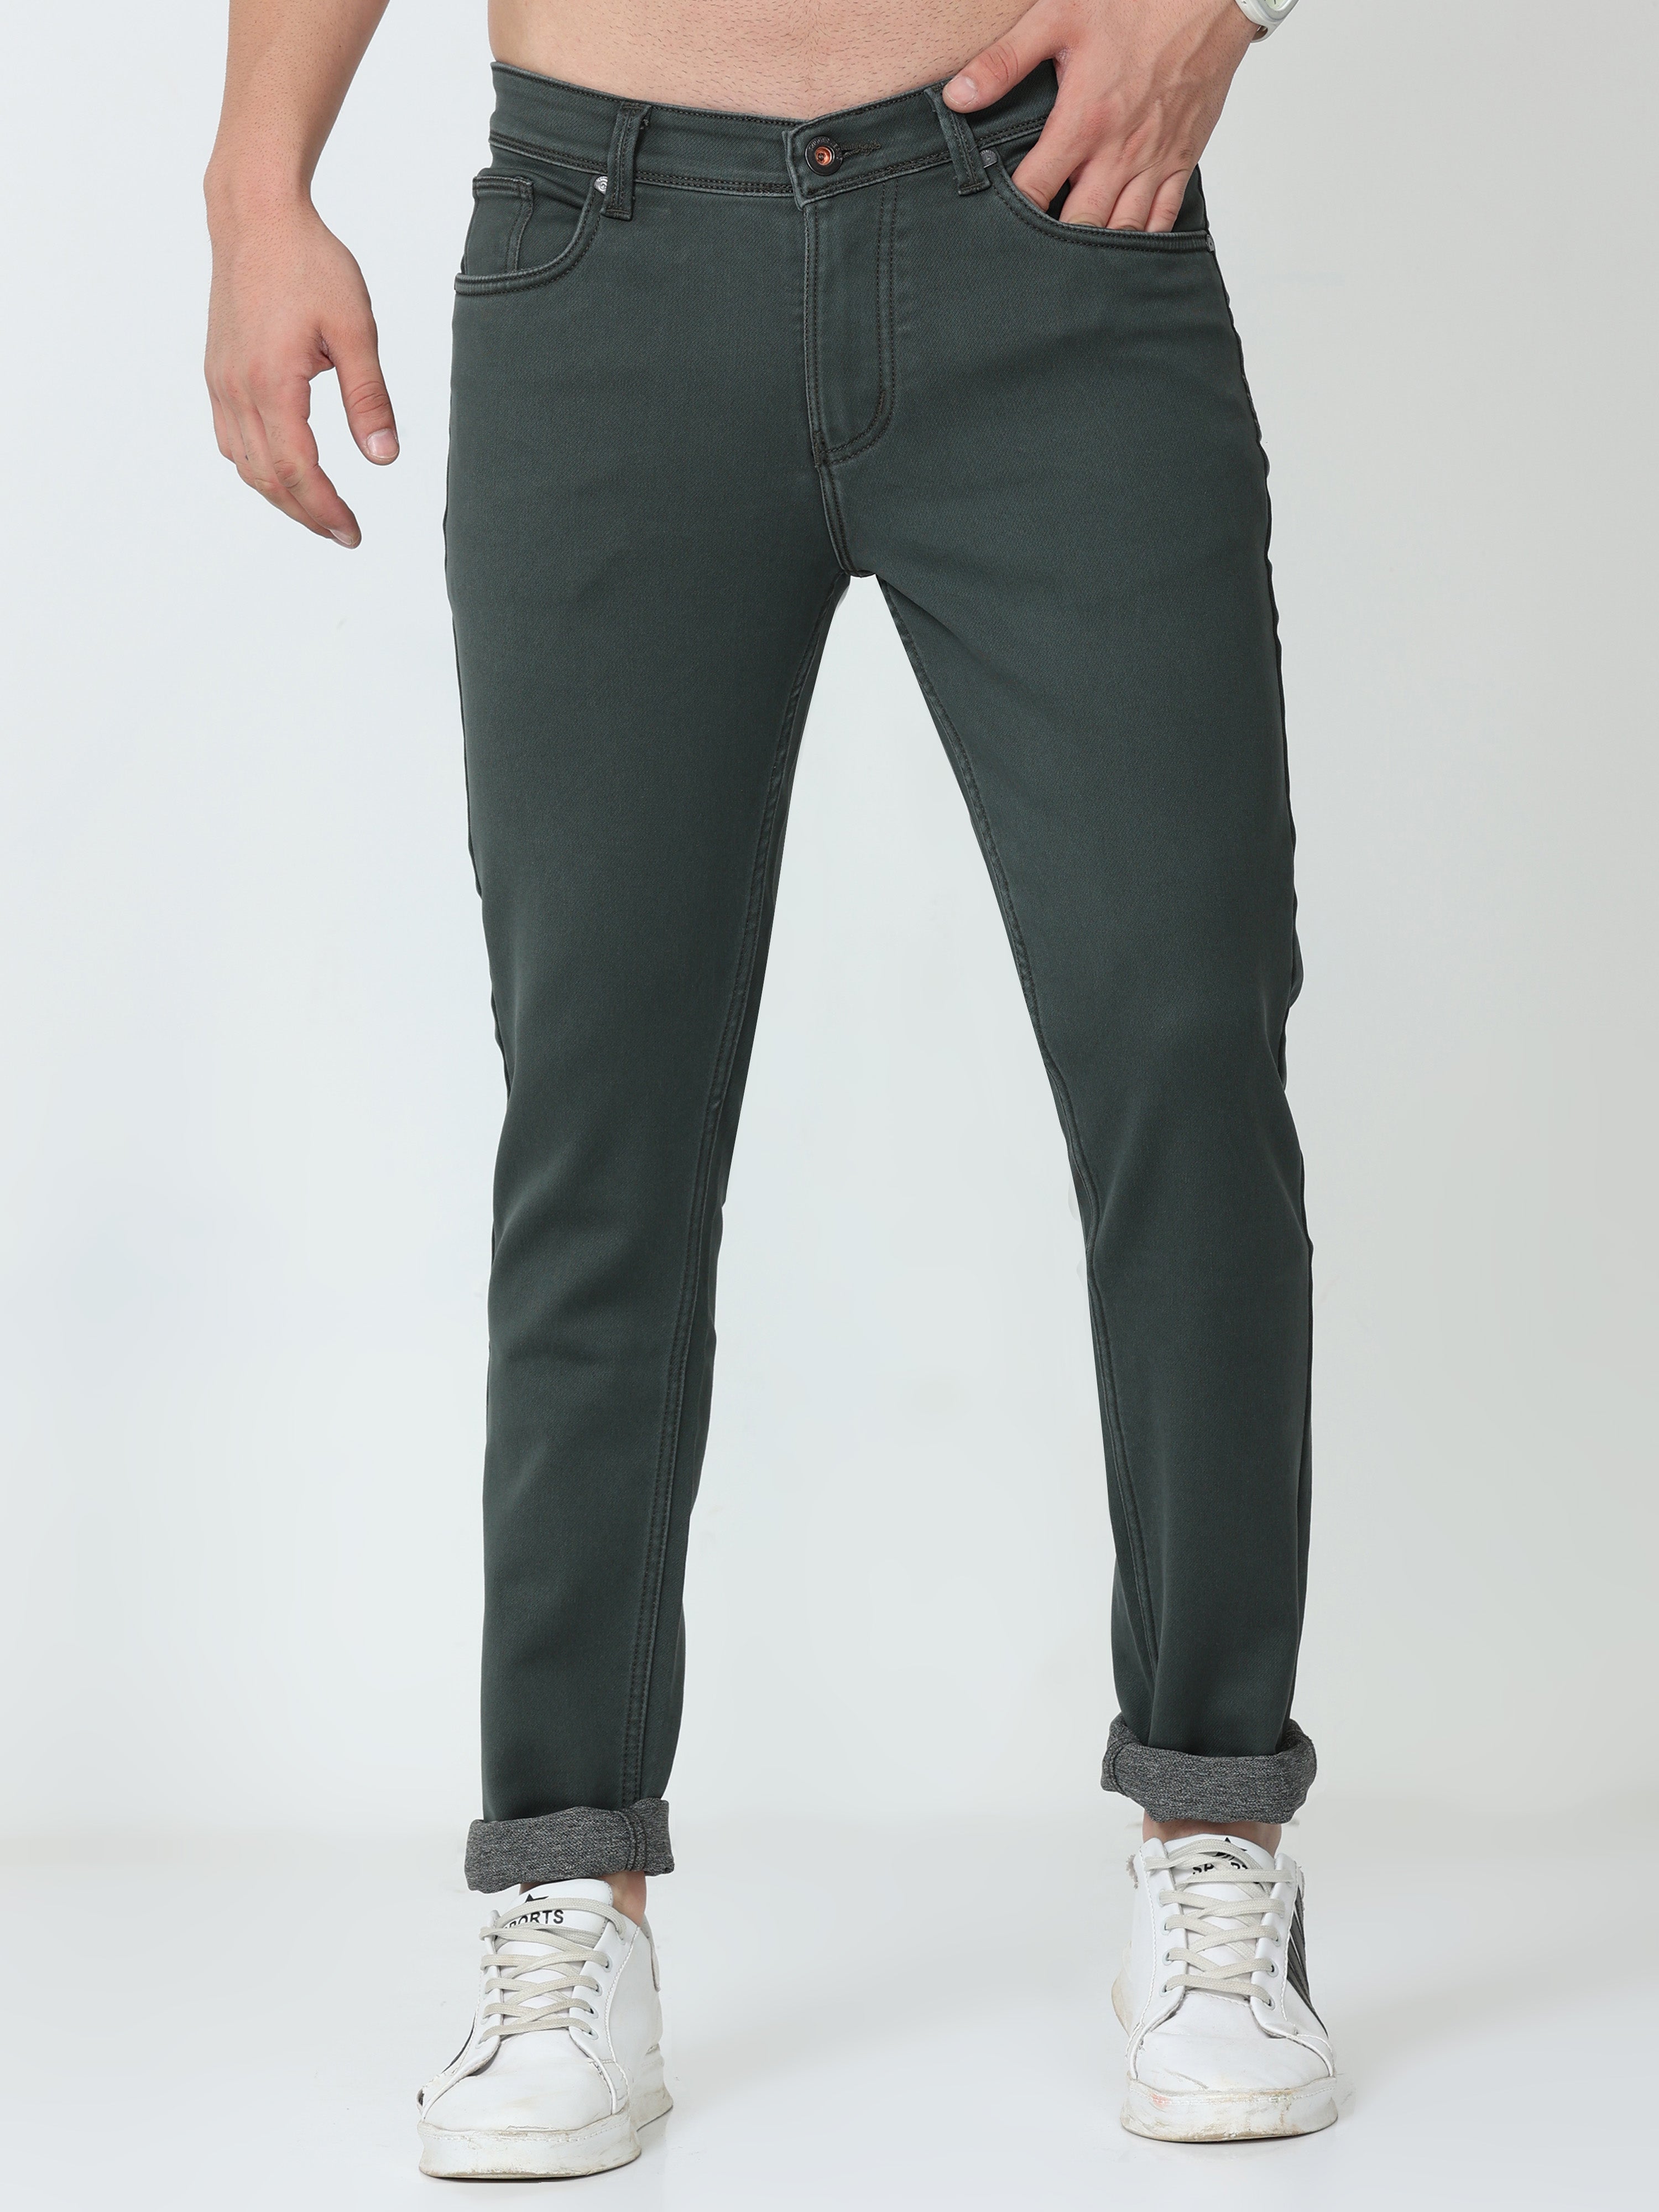 Men Slim Fit Enzyme Military Jeans